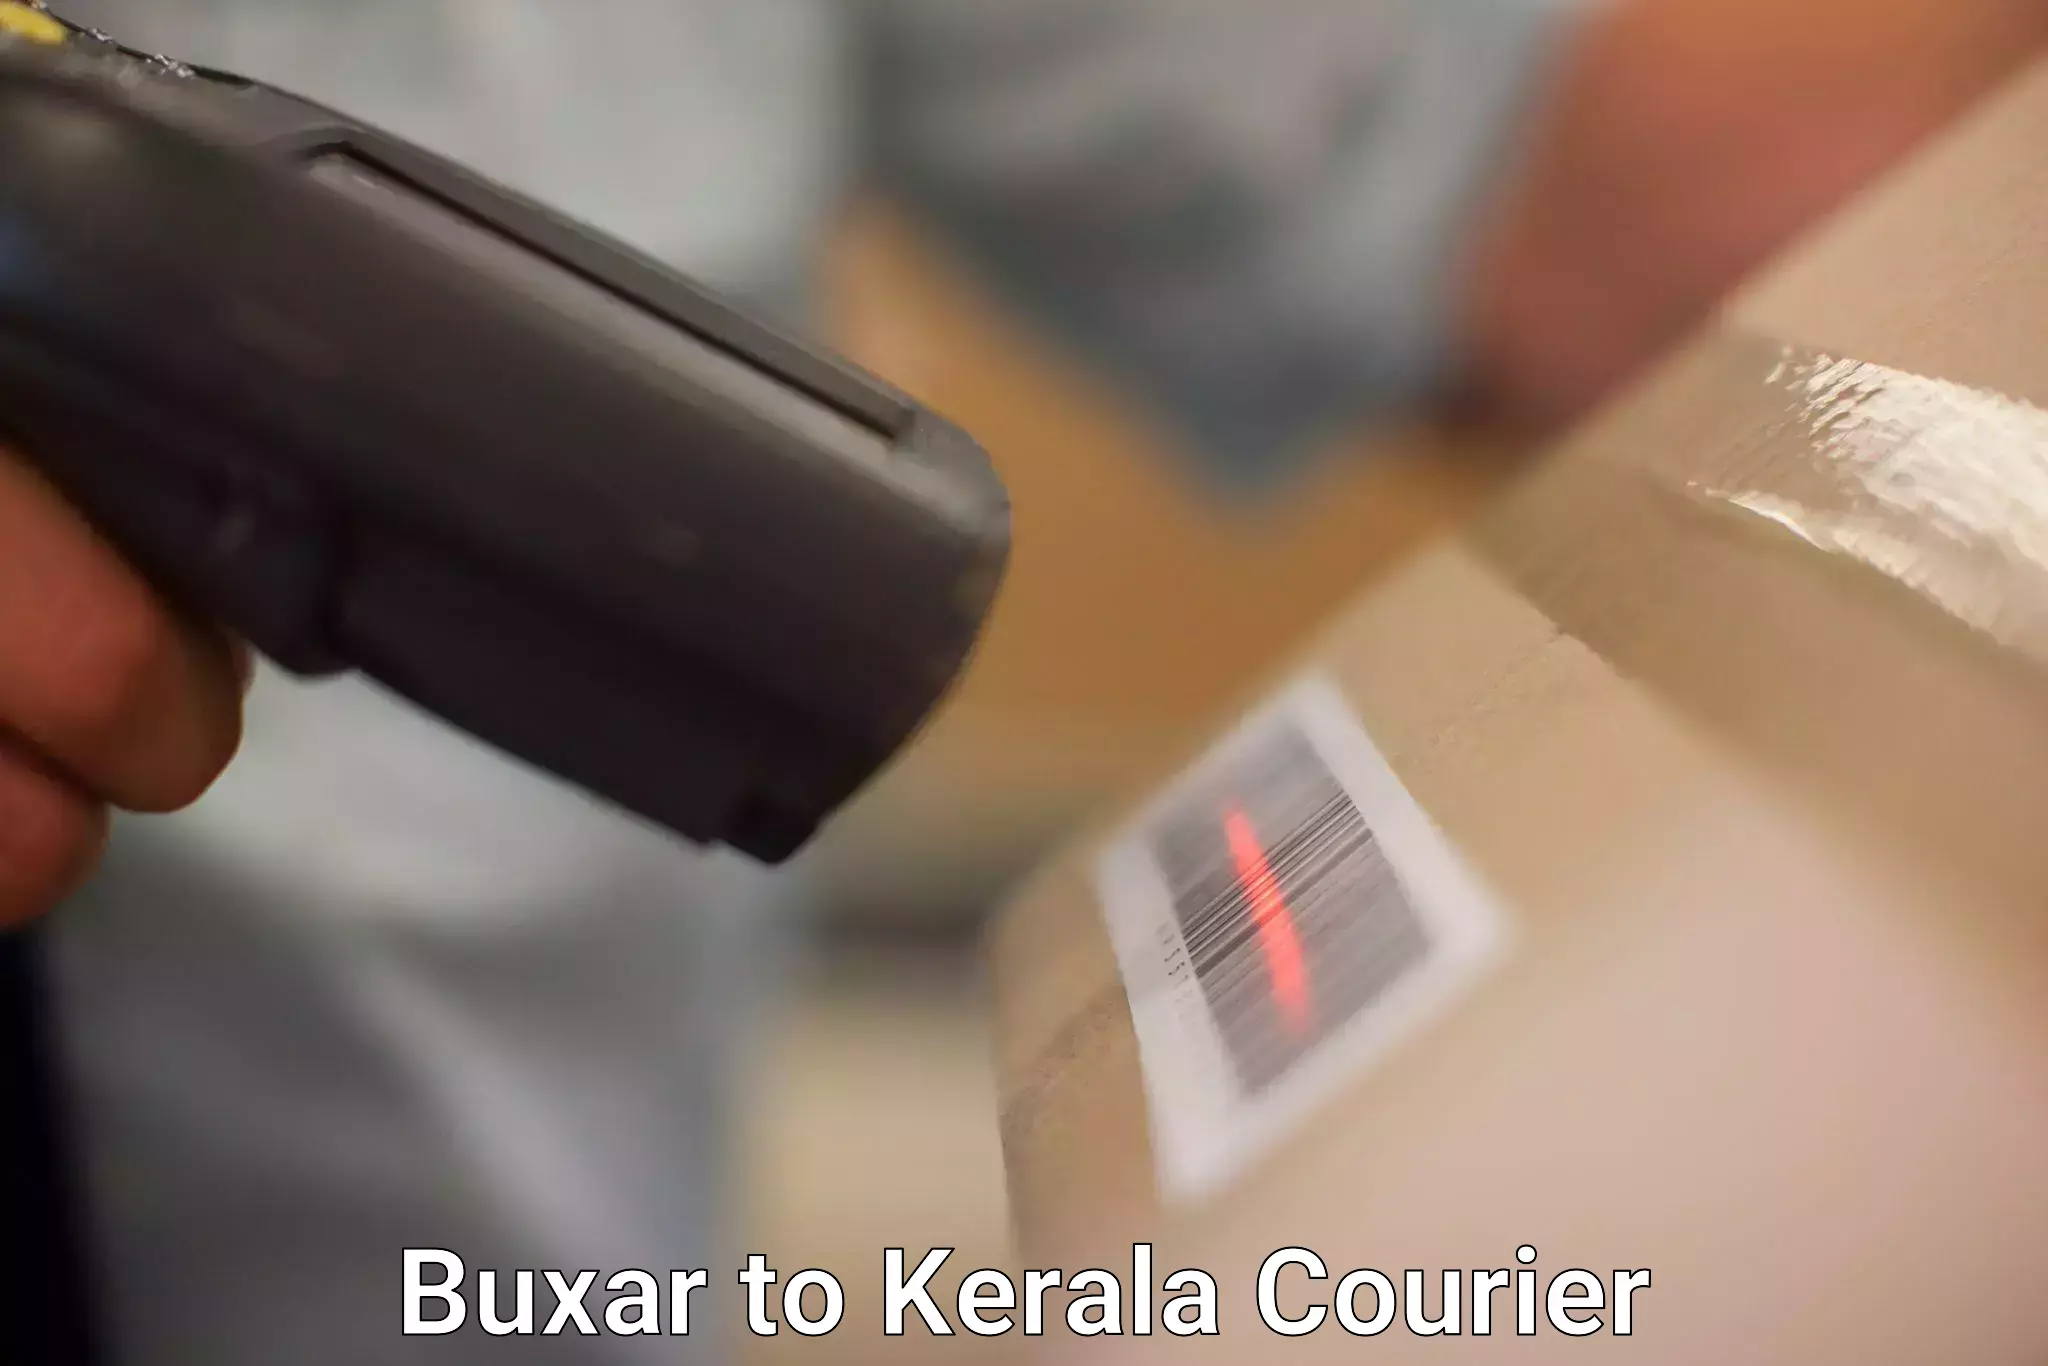 On-call courier service Buxar to Cochin Port Kochi